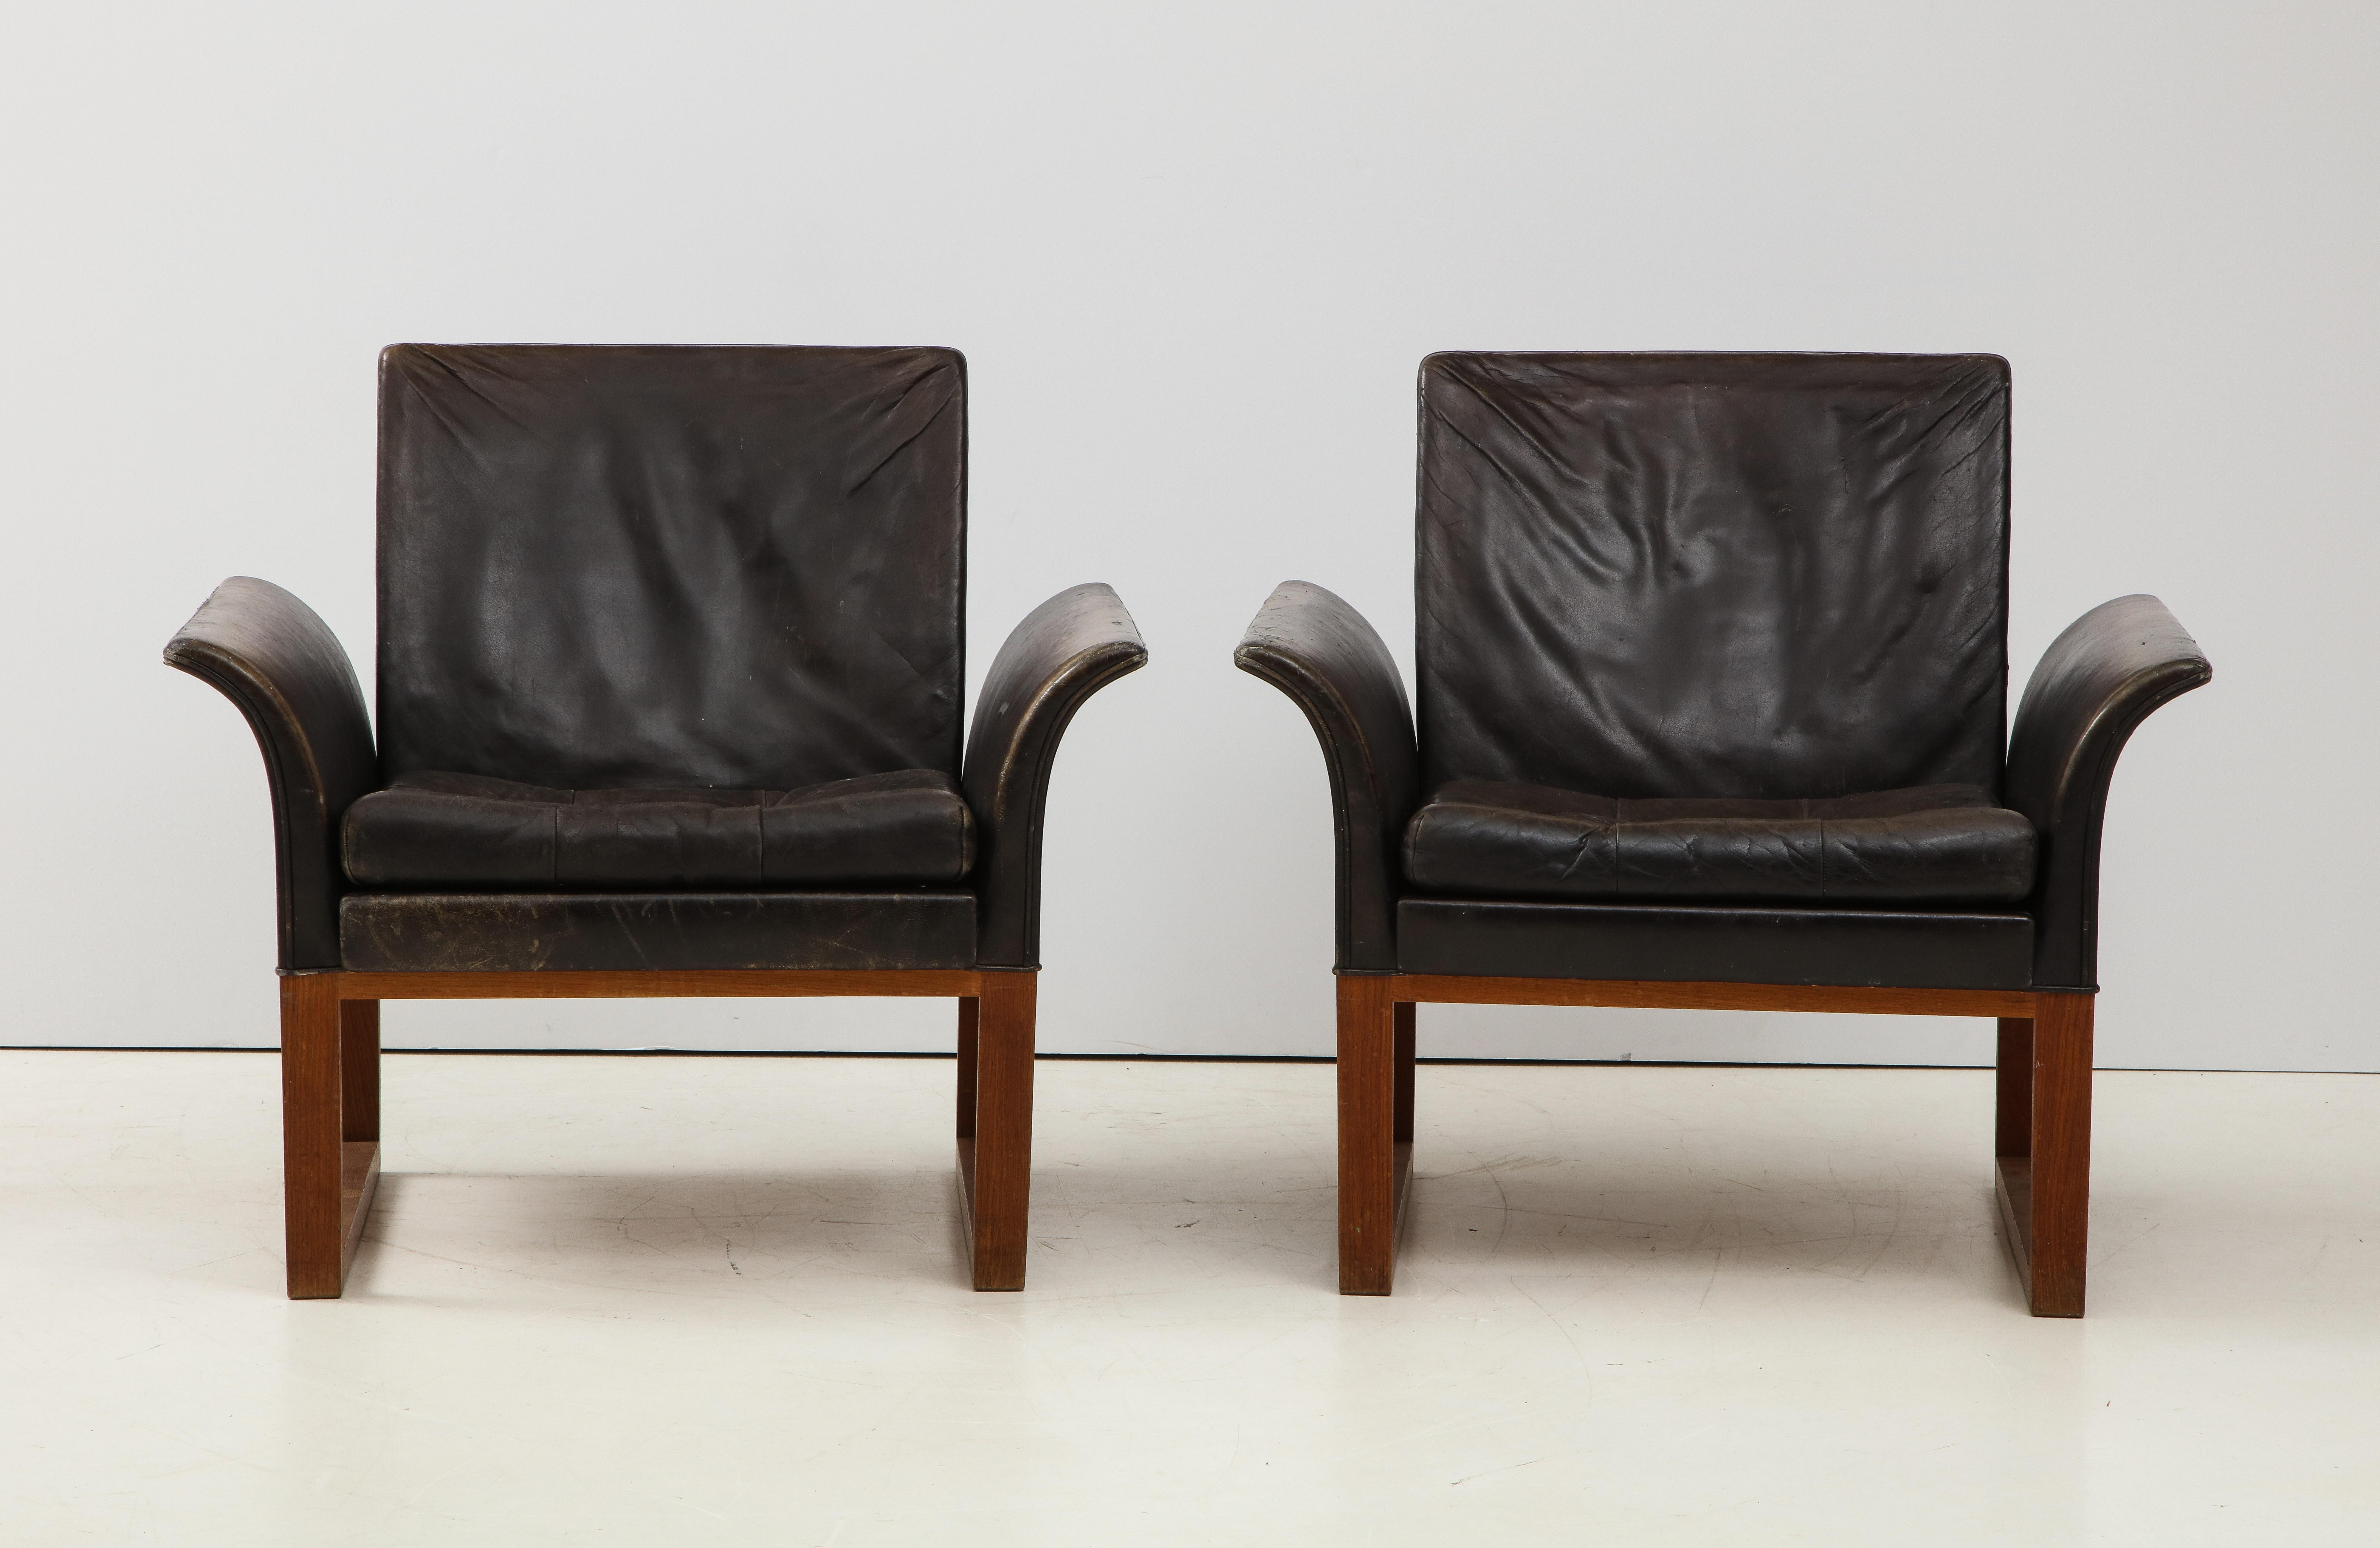 Pair of rare mid-century leather club chairs, Sweden, circa 1950s. 

Excellent construction includes clean U-shaped wood legs, button-tufted leather seat cushions, and an elegant curvature in the arms. Gorgeous patina on the leather, which is